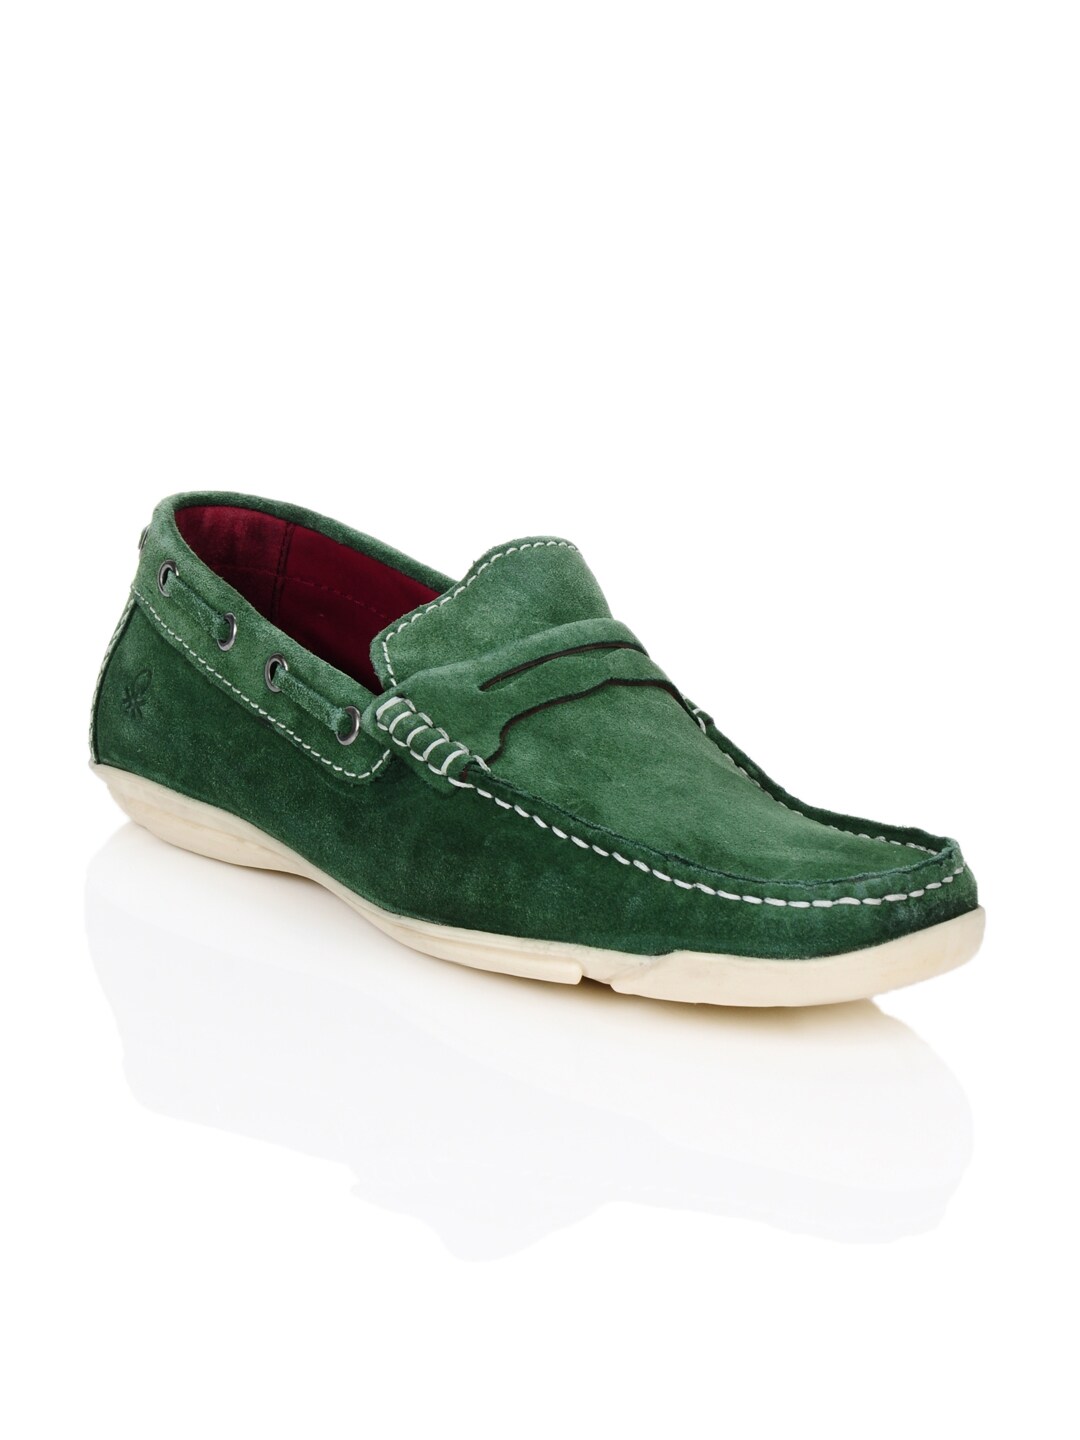 United Colors of Benetton Men Green Shoes